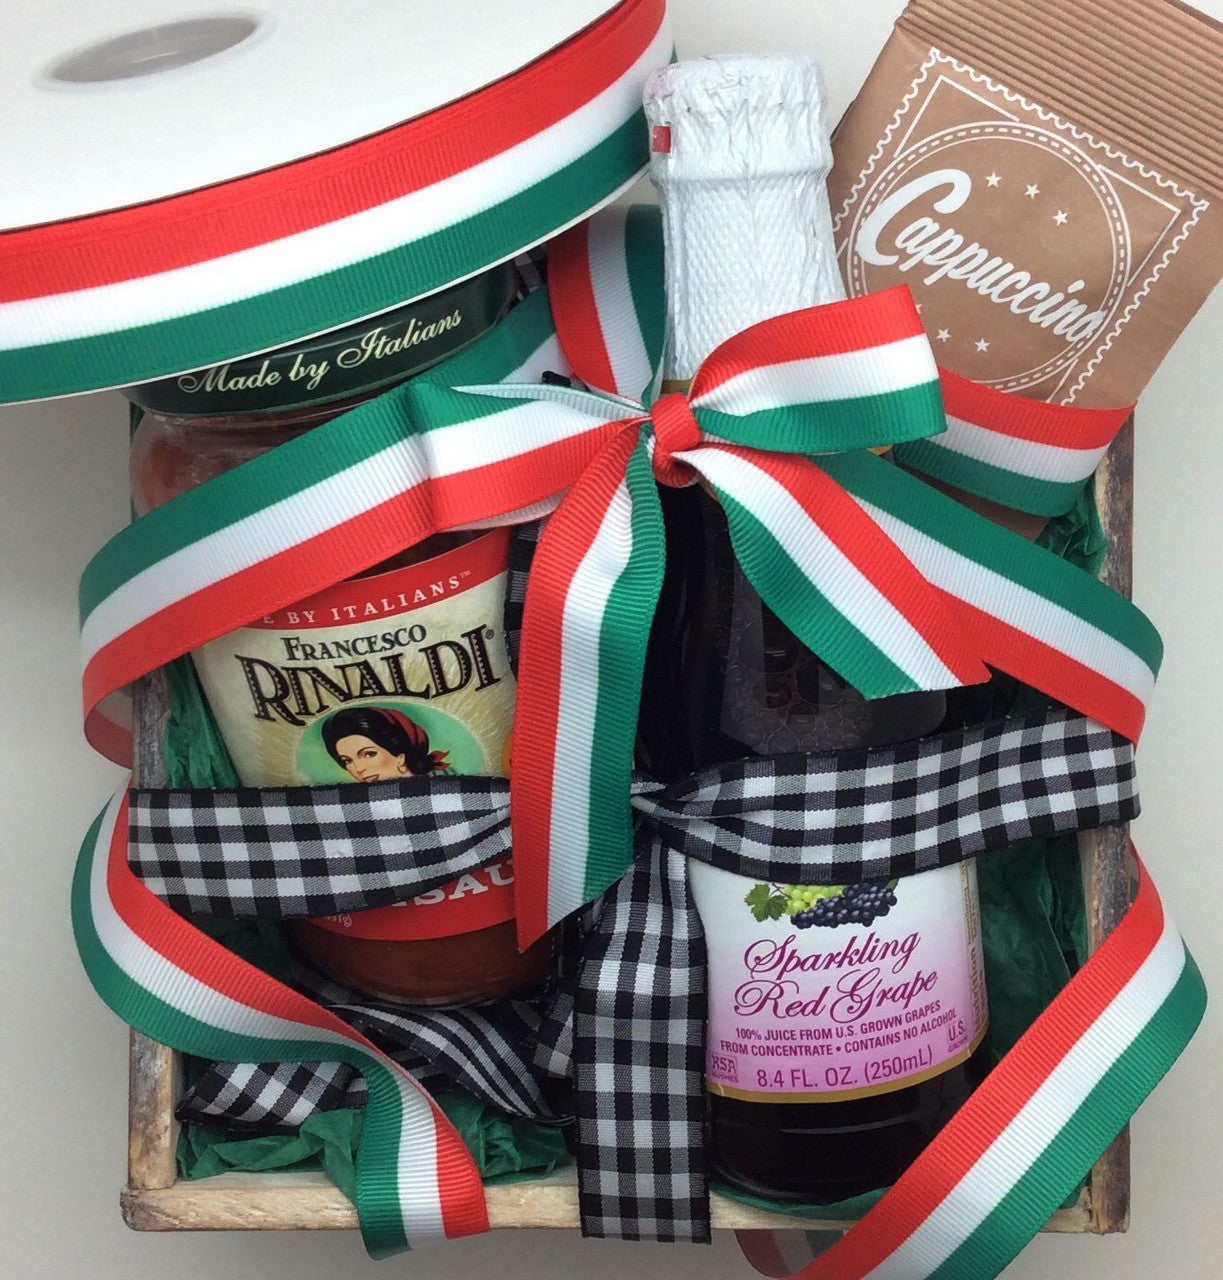 Preparing a gift basket with an Italian theme? Our Italian flag stripe ribbon printed on 7/8" white grosgrain is the perfect touch for the bow!